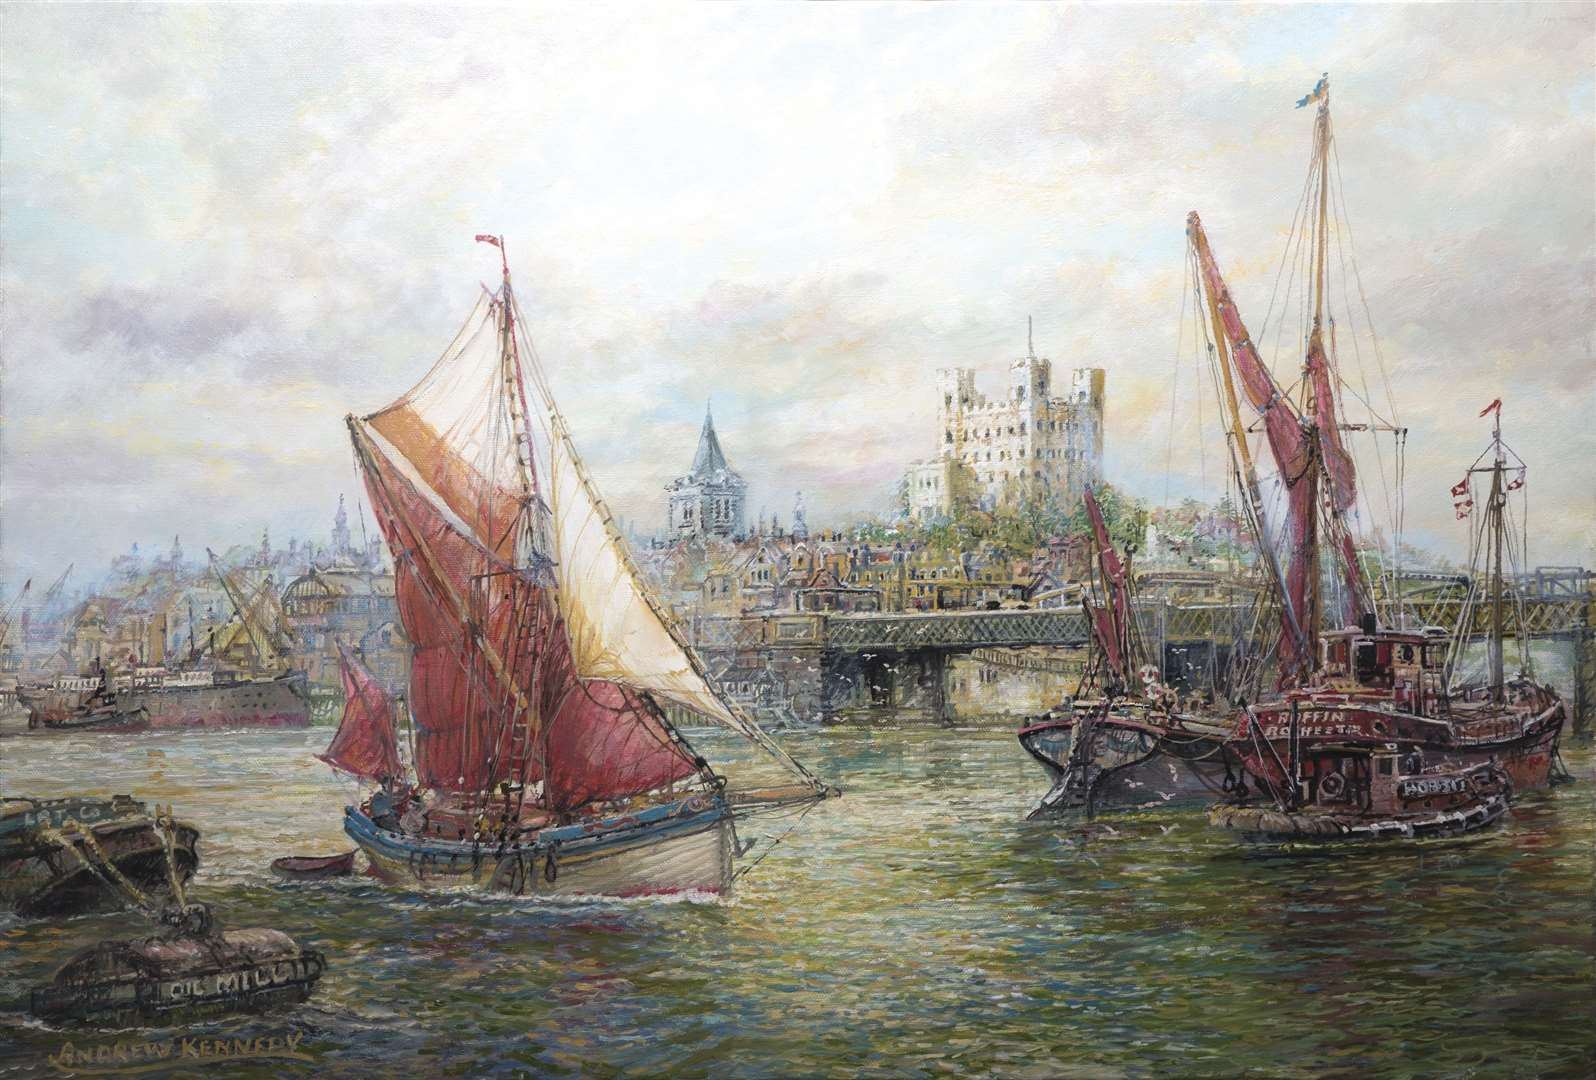 A painting by John's close friend Andrew Kennedy with the 'Hobbit' tug in the foreground under the Rochester Bridge